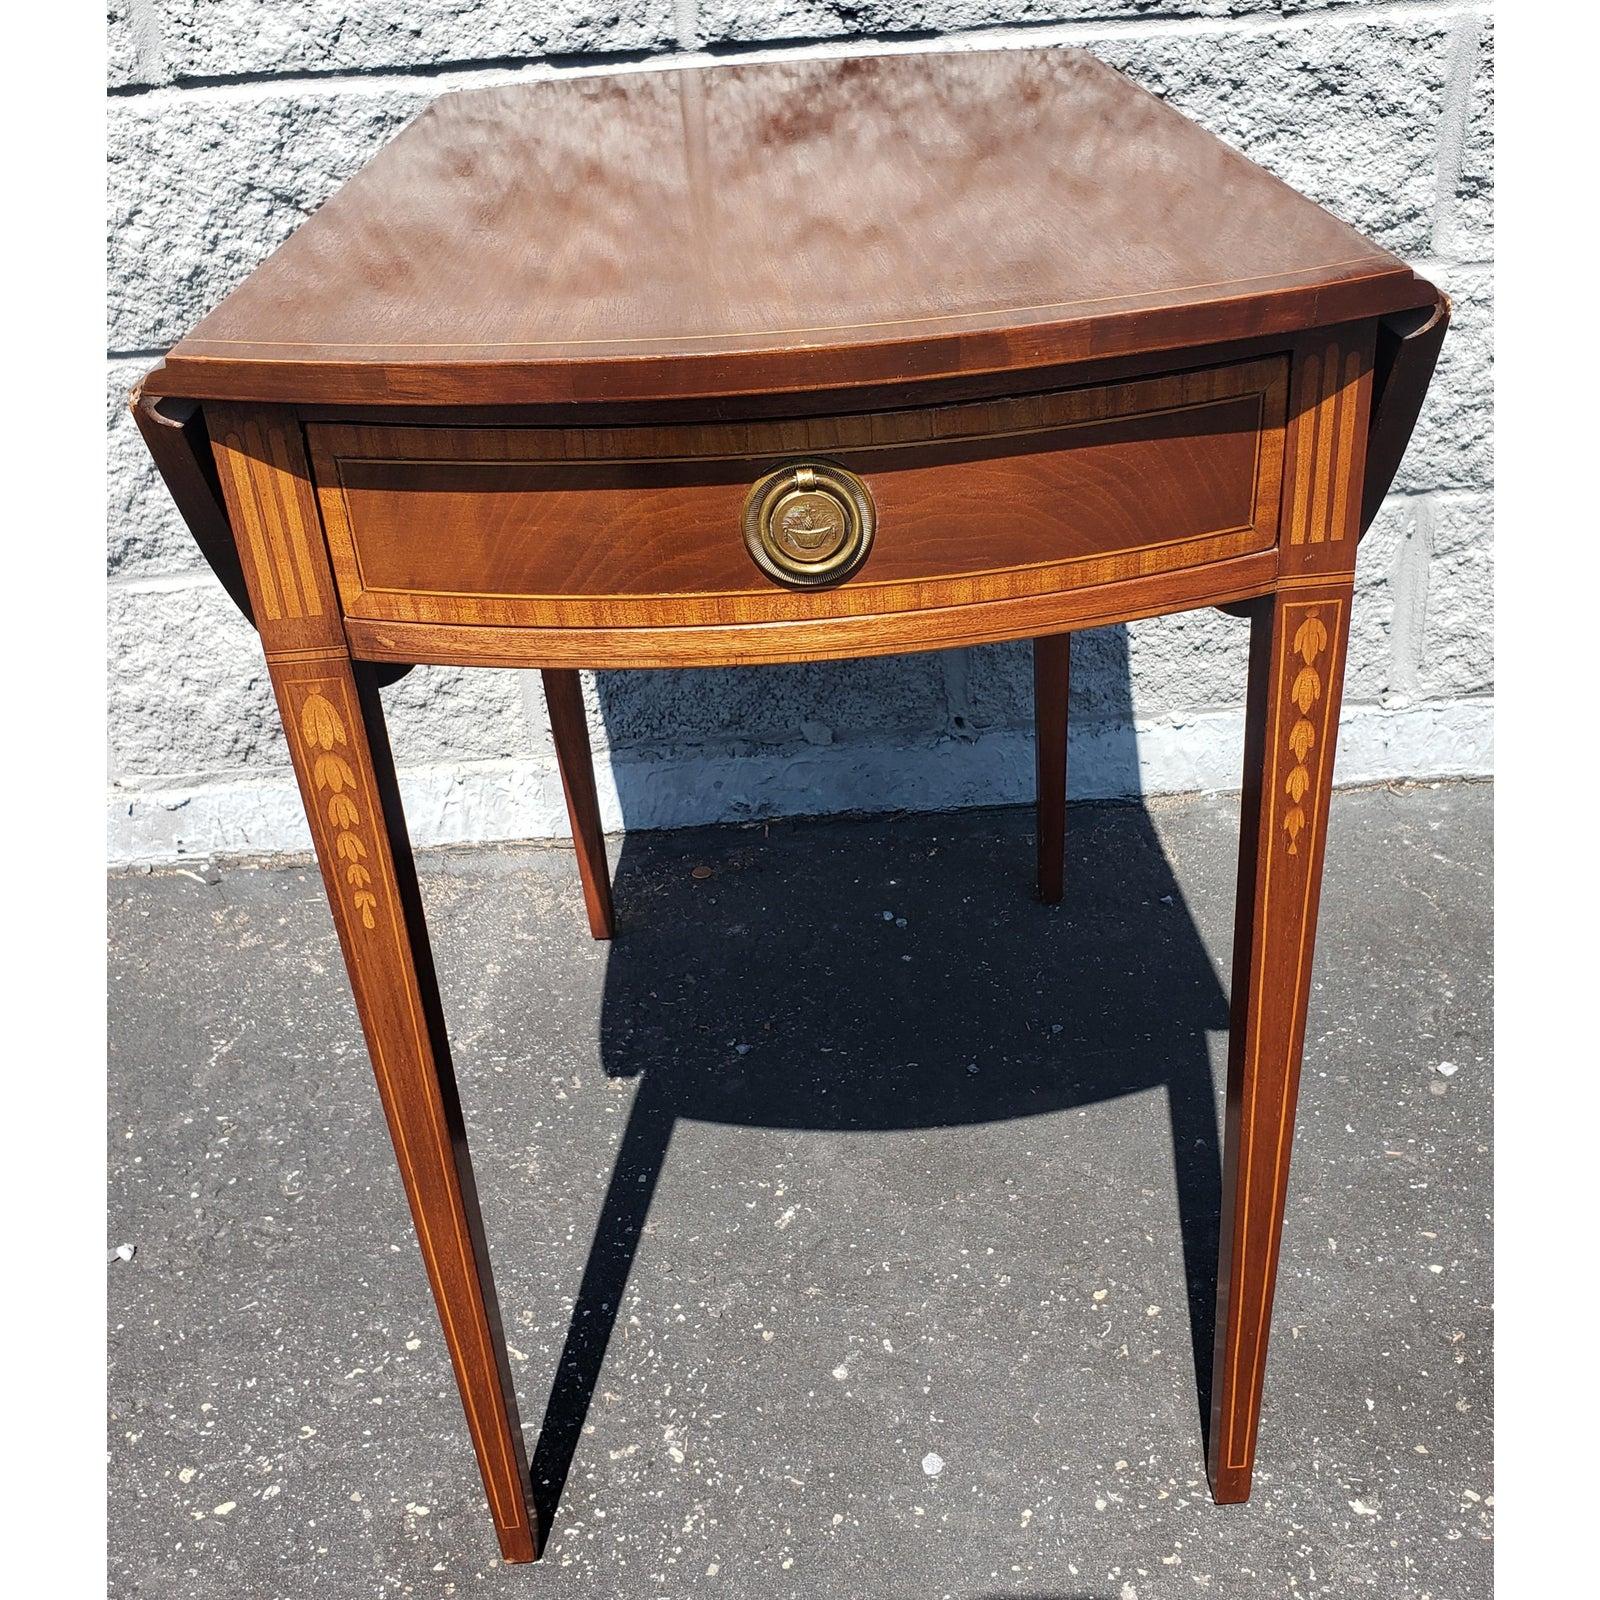 Inlaid mahogany and satin wood drop leaf pembroke side table. Height: 27.88 Inches; Width: 21.5 Inches; Depth: 39.75 Inches. A gorgeous Sheraton style Pembroke nightstand or end table
USA, Circa 1970s. Mahogany, with satinwood inlay and original